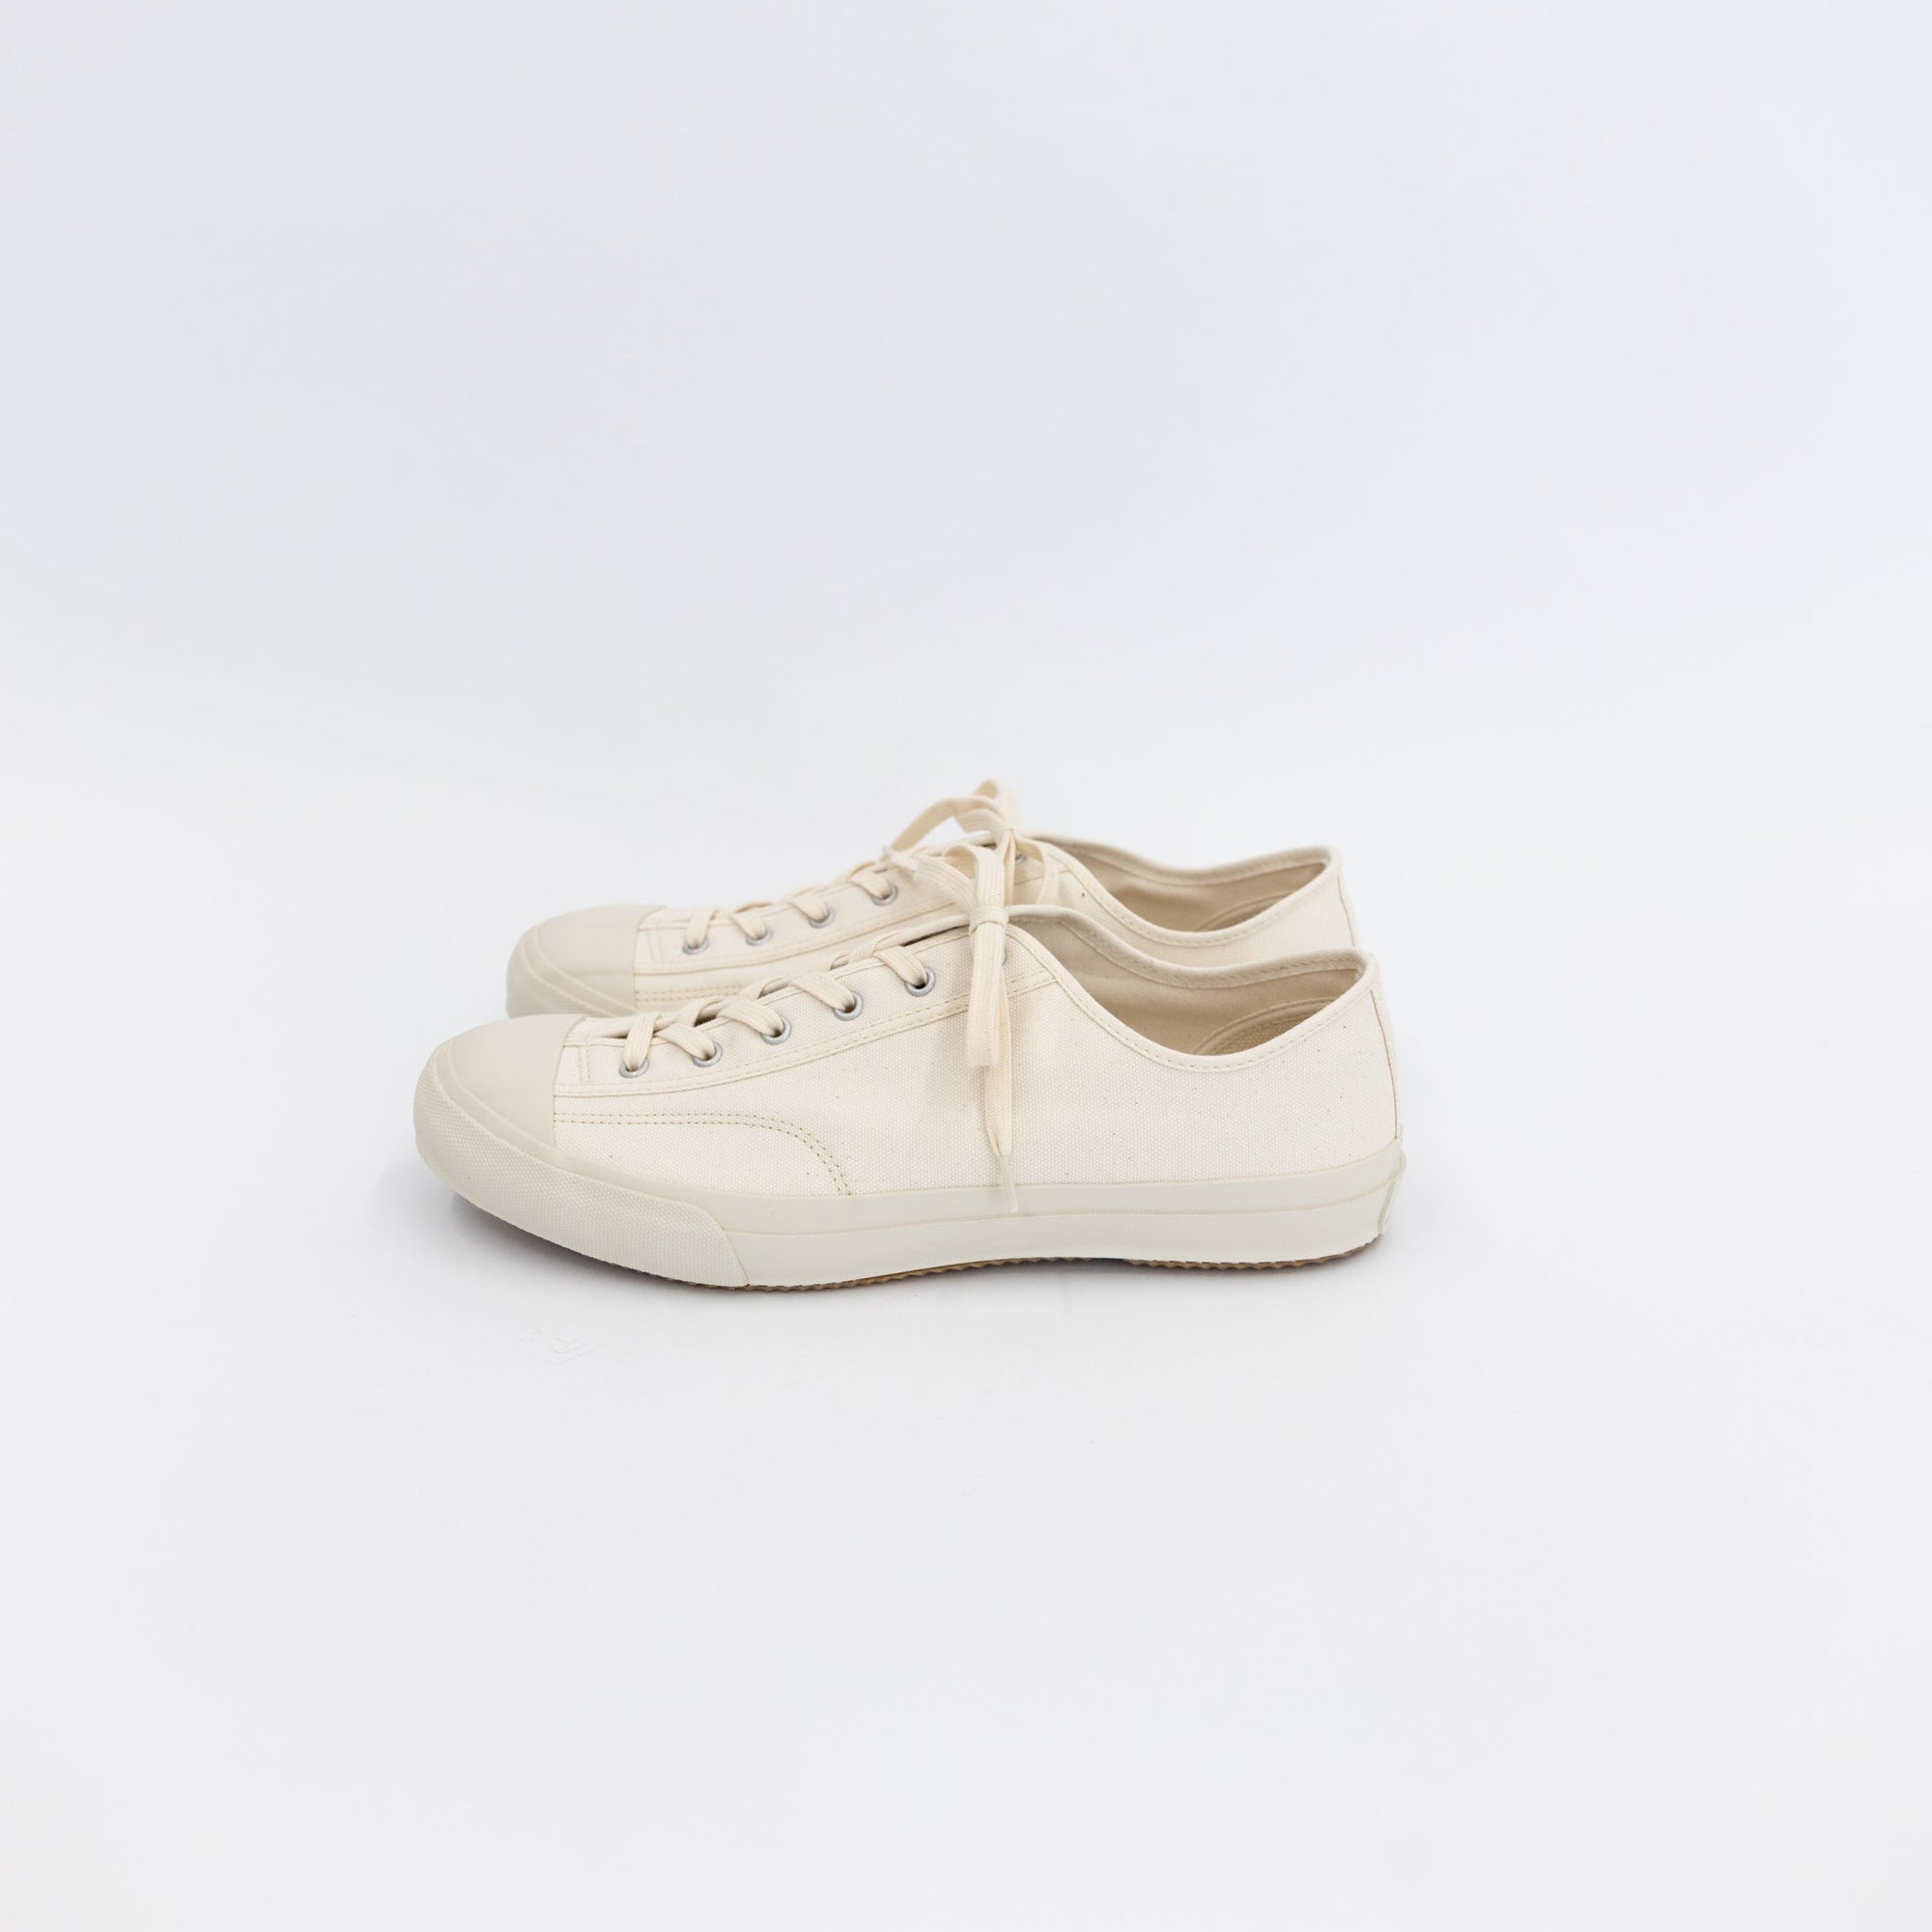 Moonstar Gym Classic White Shoes | Tortoise General Store